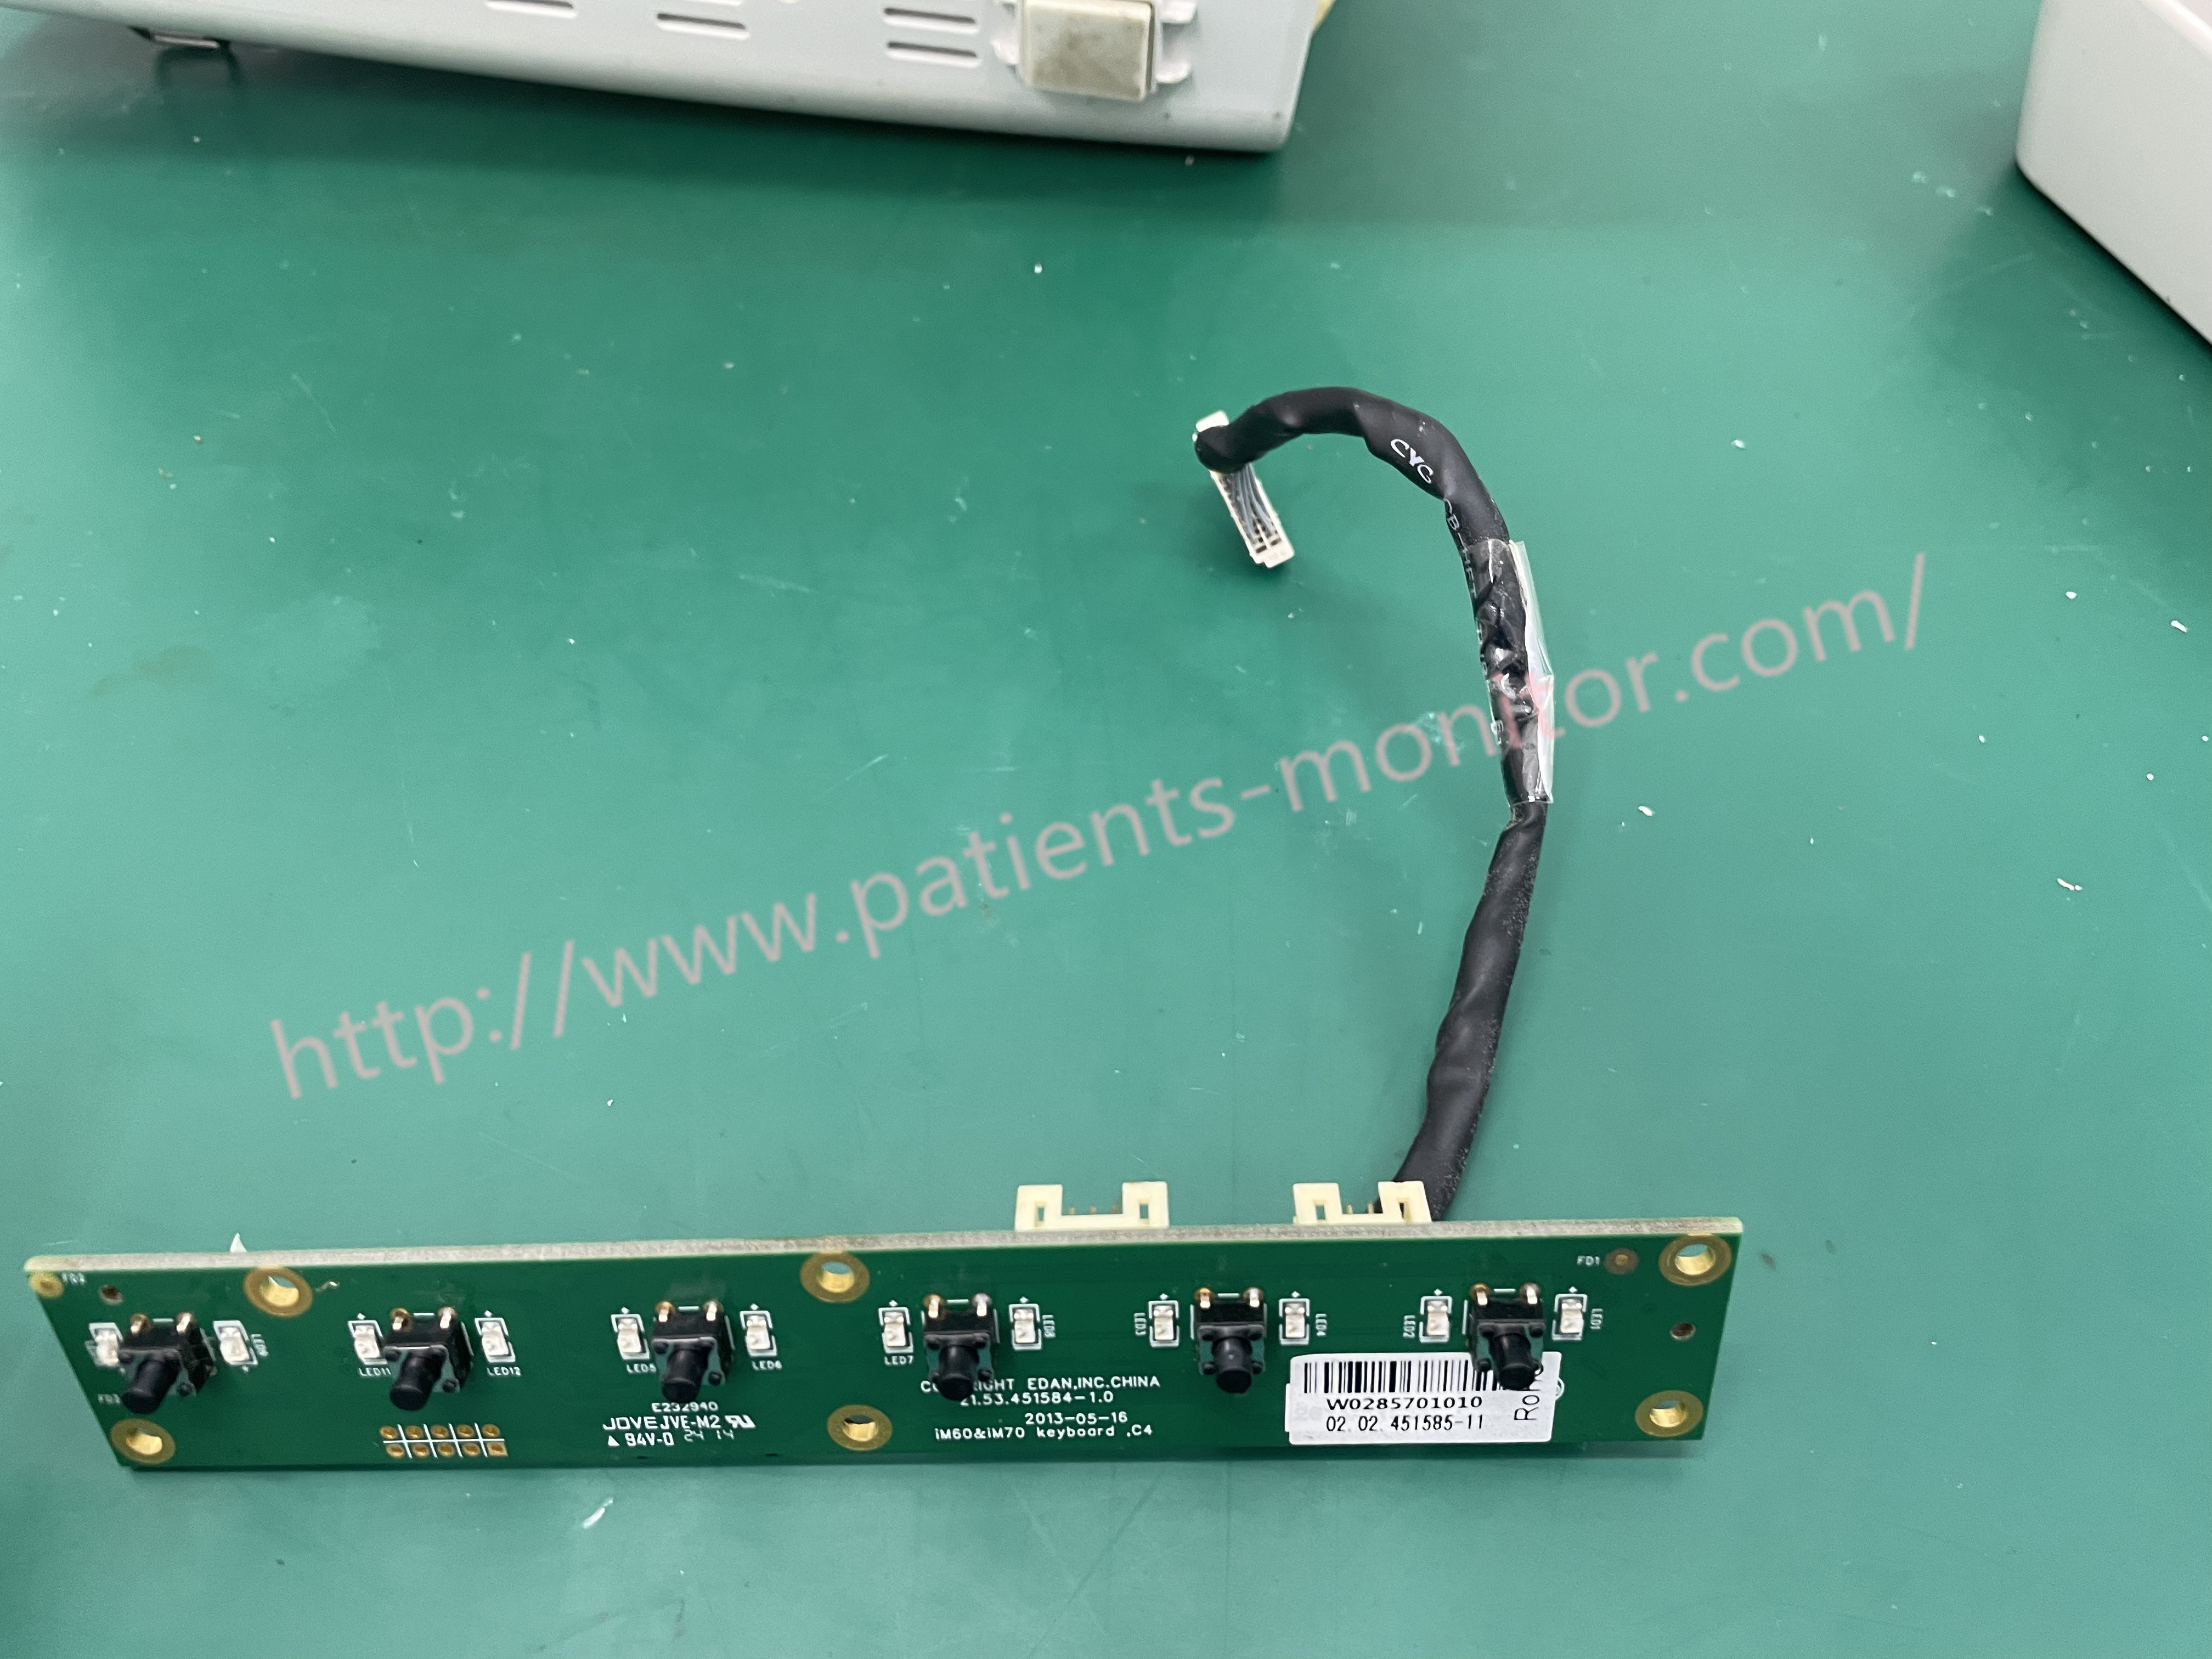  02.03.451585-11 Patient Monitor Parts Keypad Board Used Condition Manufactures